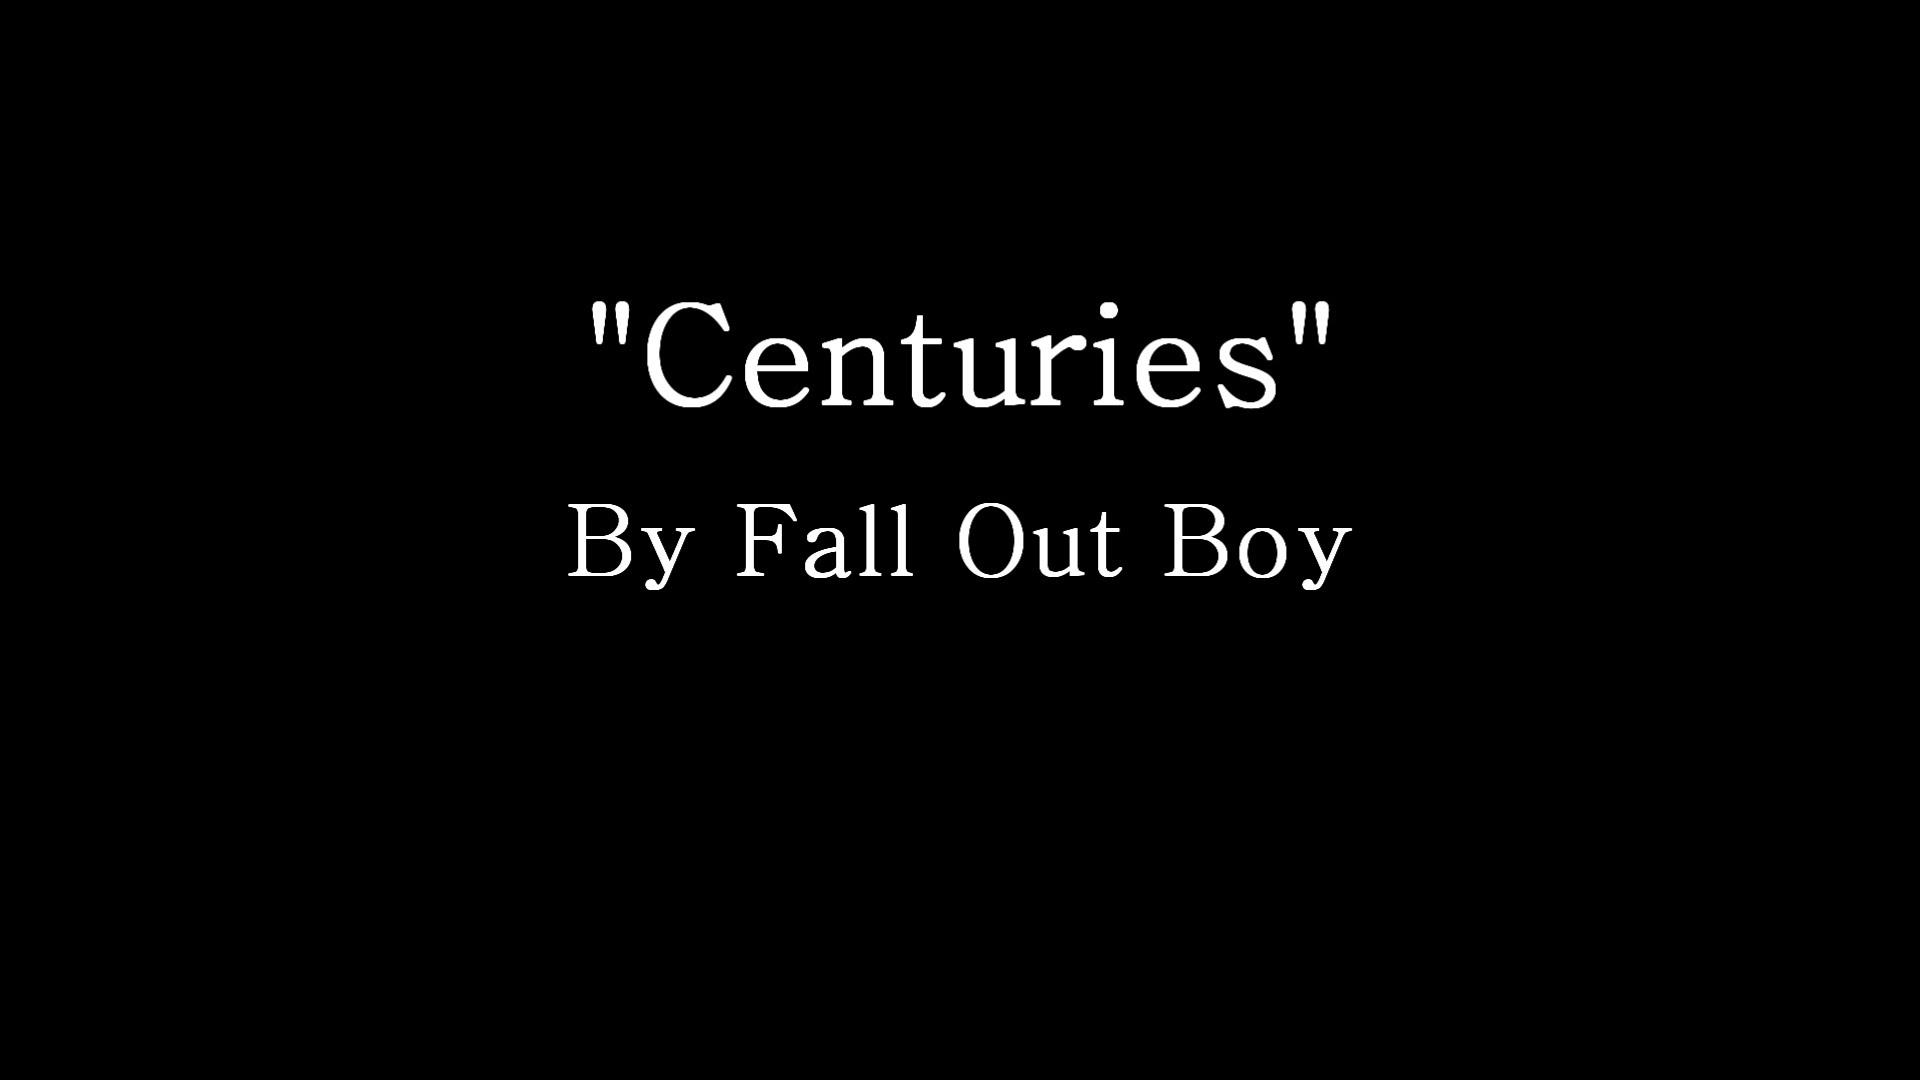 Centuries fall out. Fall out boy Centuries. Centuries Fall out boy текст. Песня remember me for Centuries. Centuries текст.